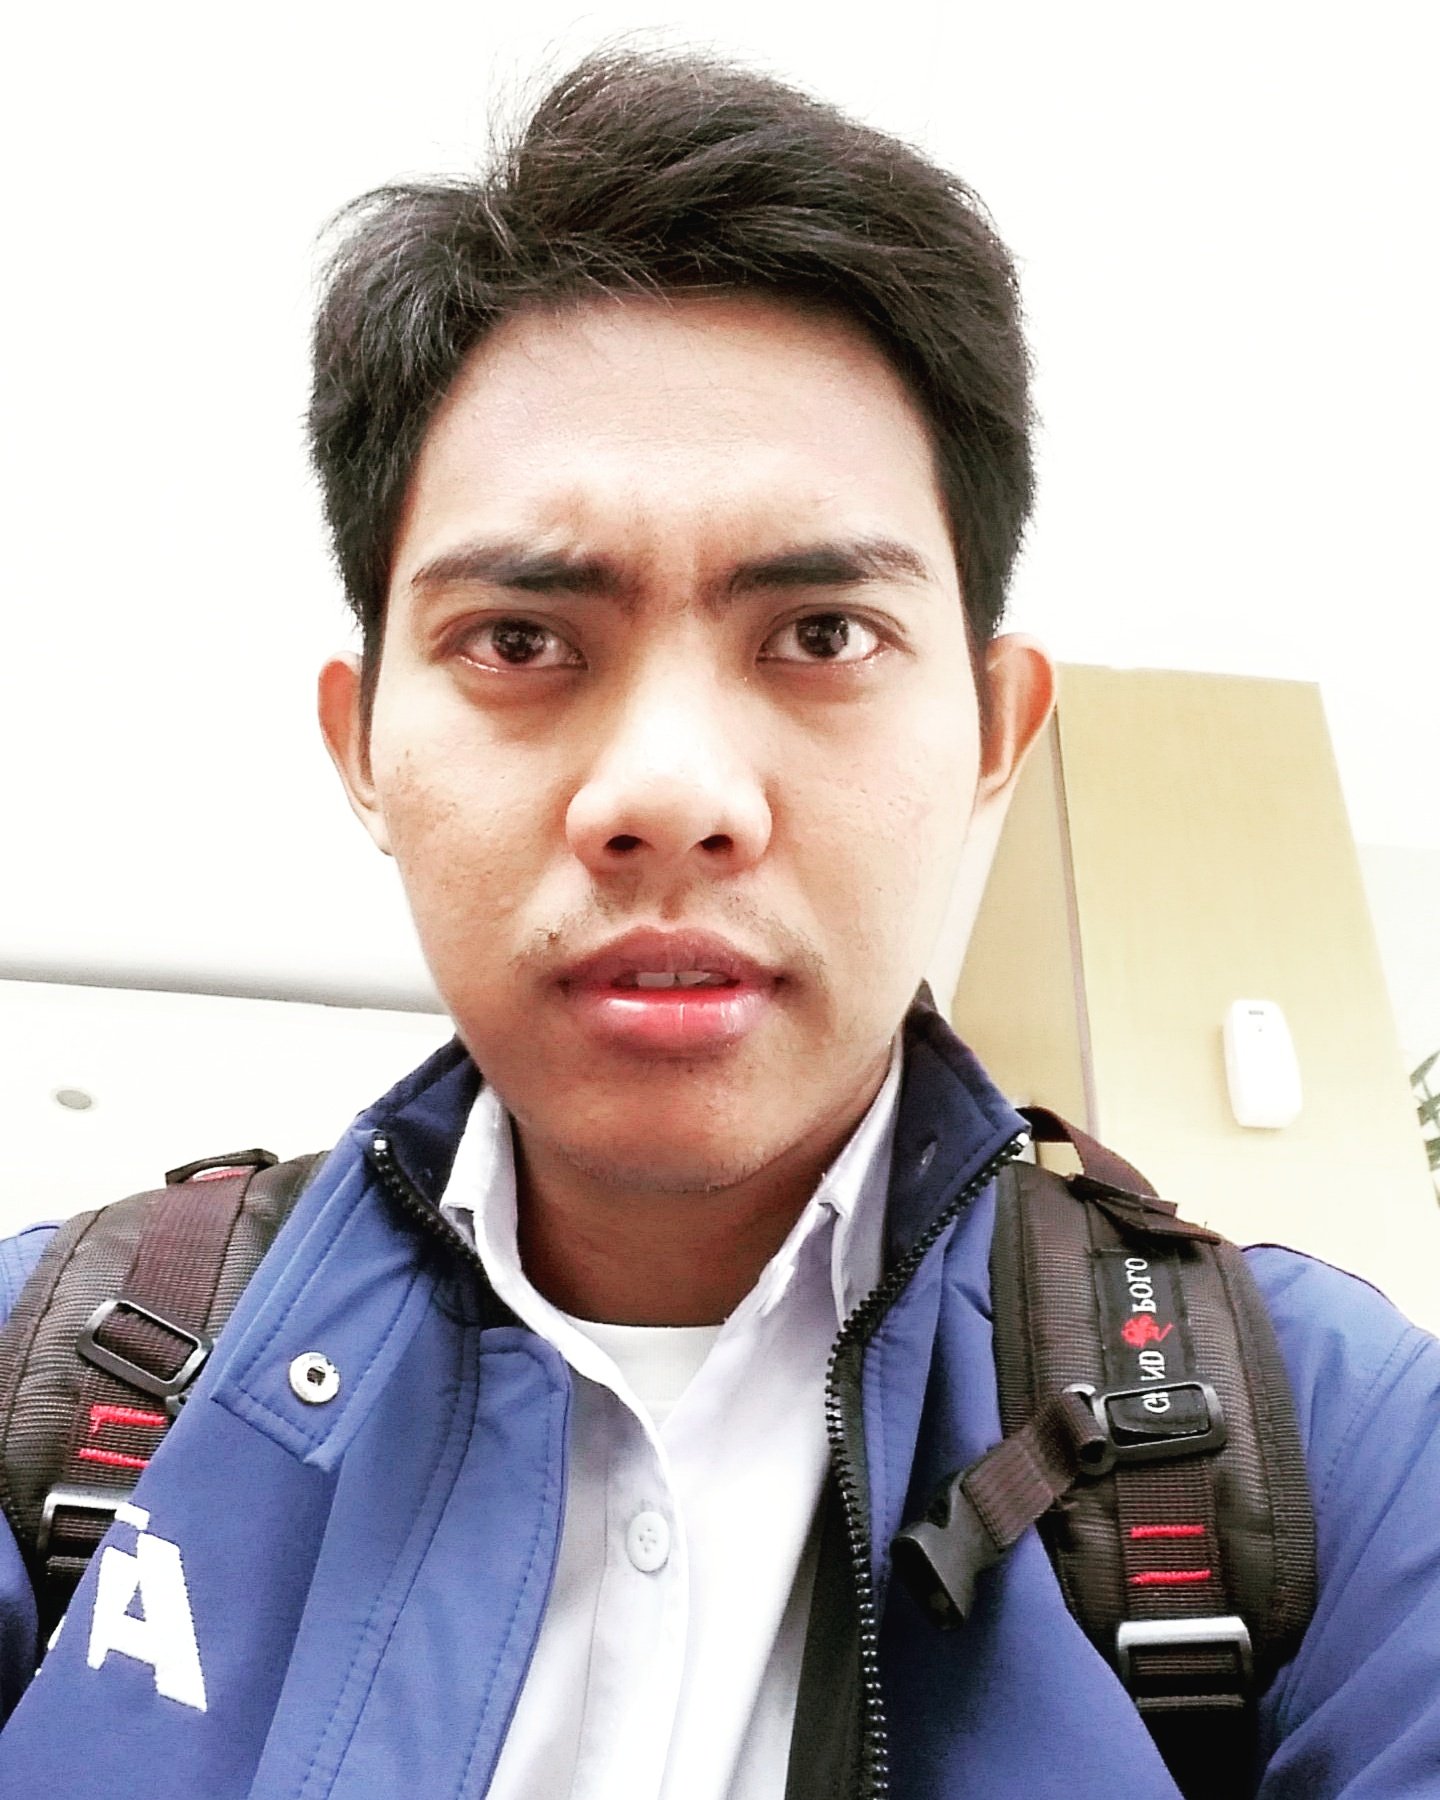 Live is Adventure | Aircraft Engineering Maintenance | Civil Aviation Safety and Engineering Academy of Surabaya| Aircraft Technician in Lion Air